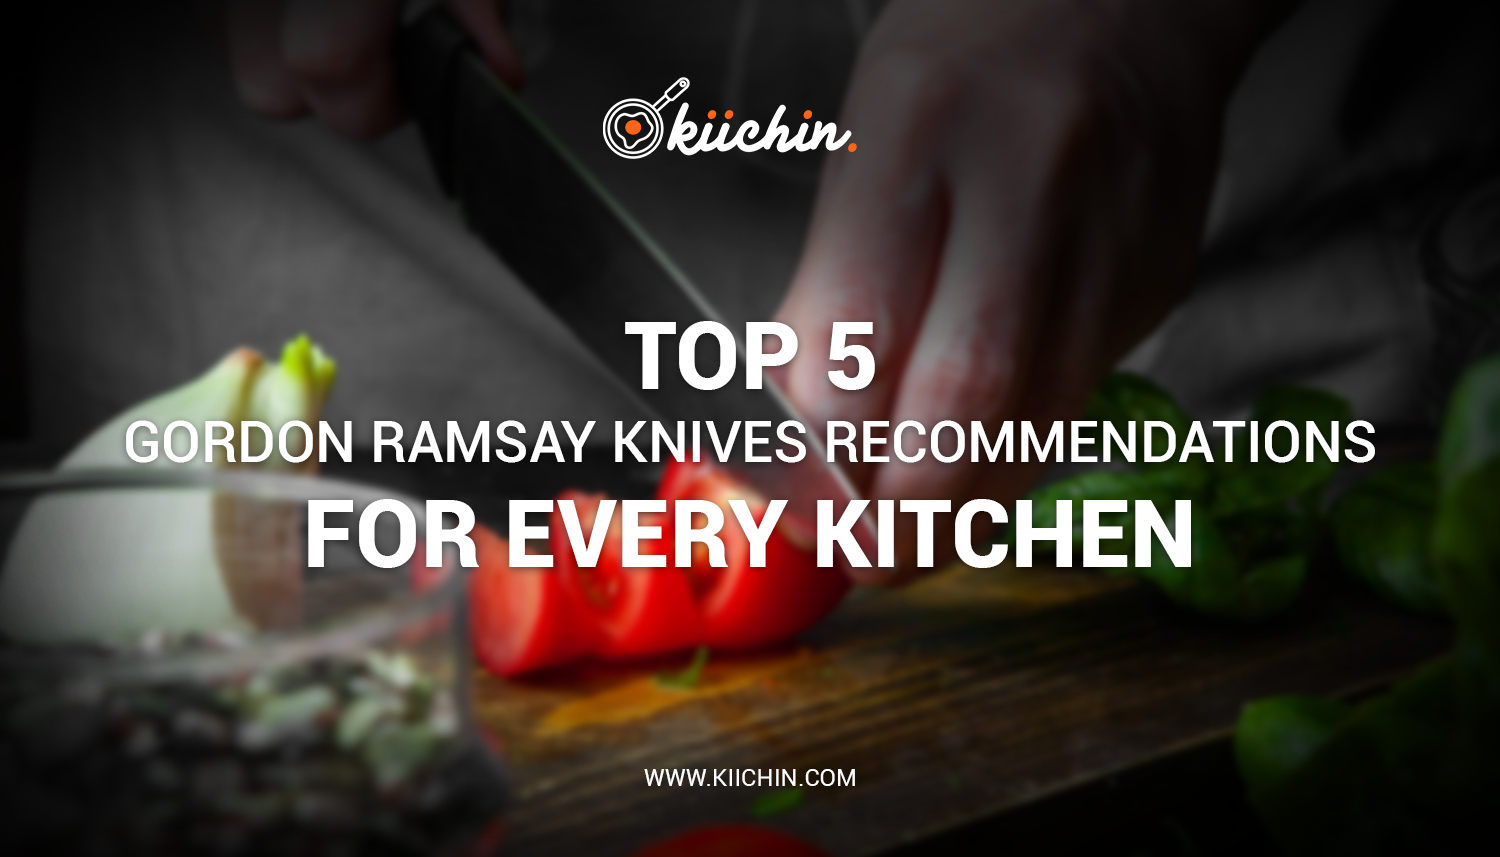 Top 5 Gordon Ramsay Knives Recommendations For Every Kitchen